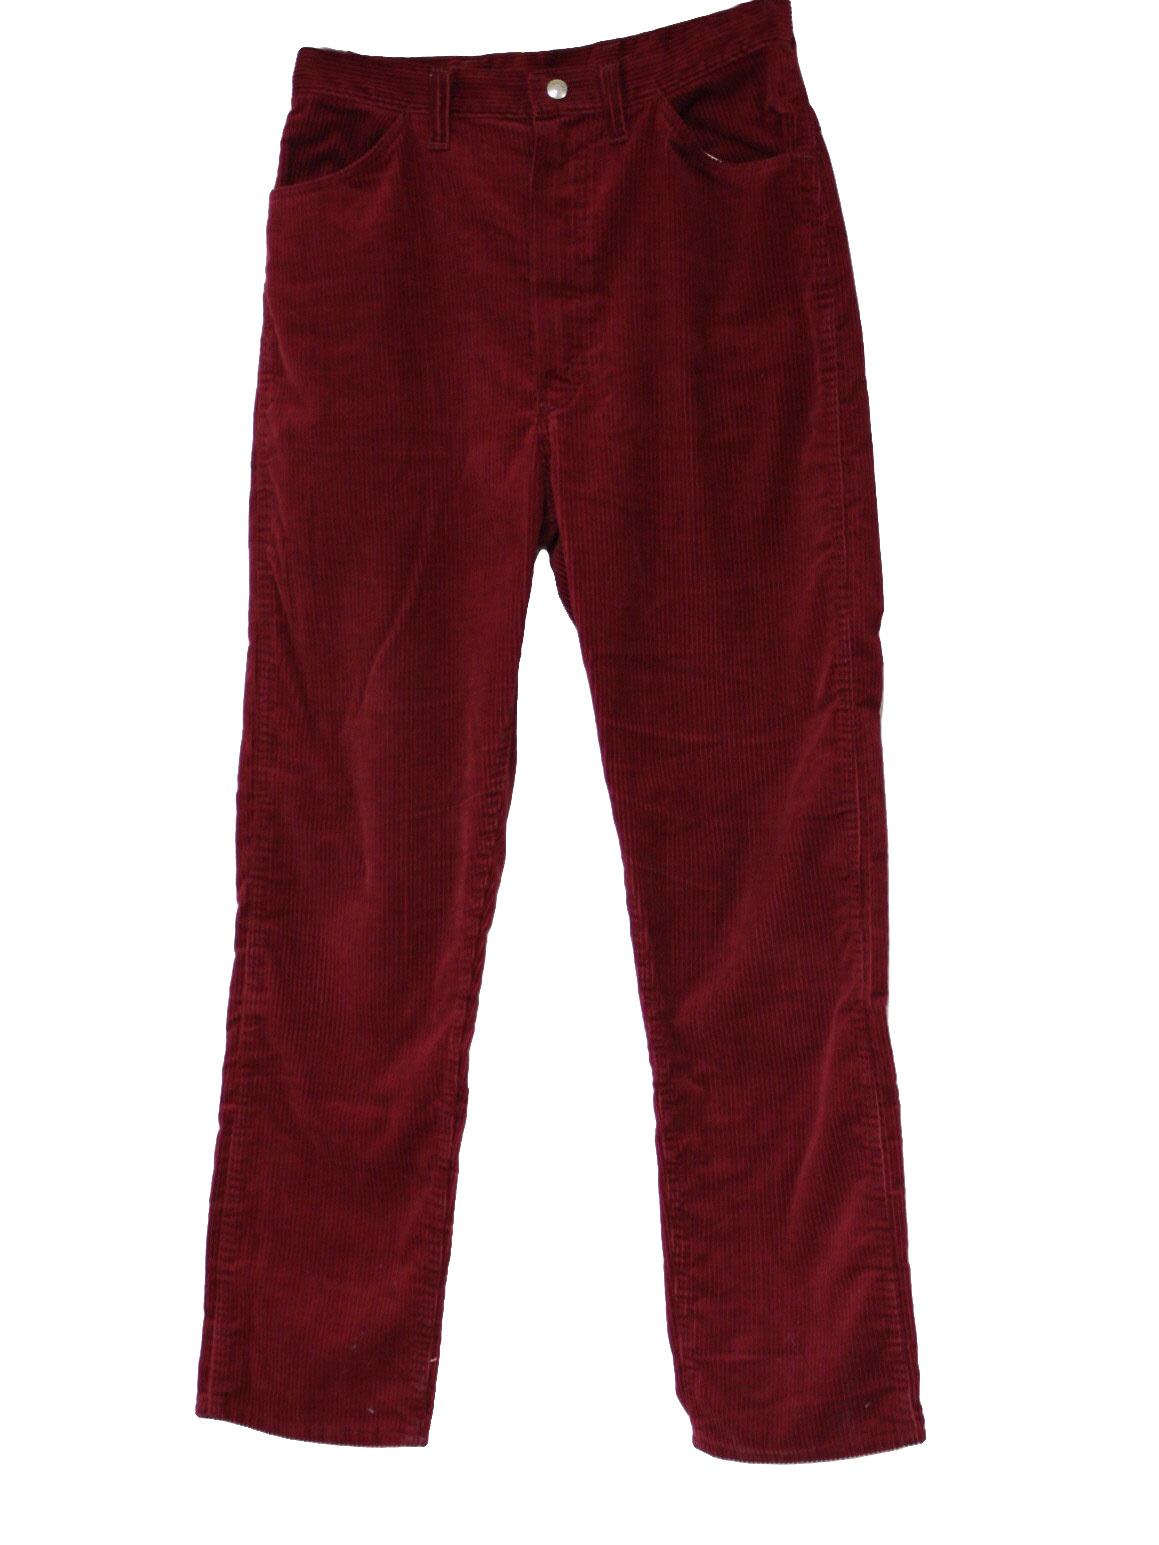 Retro 1980s Pants: 80s -Wrangler- Womens ruby red cotton and polyester ...